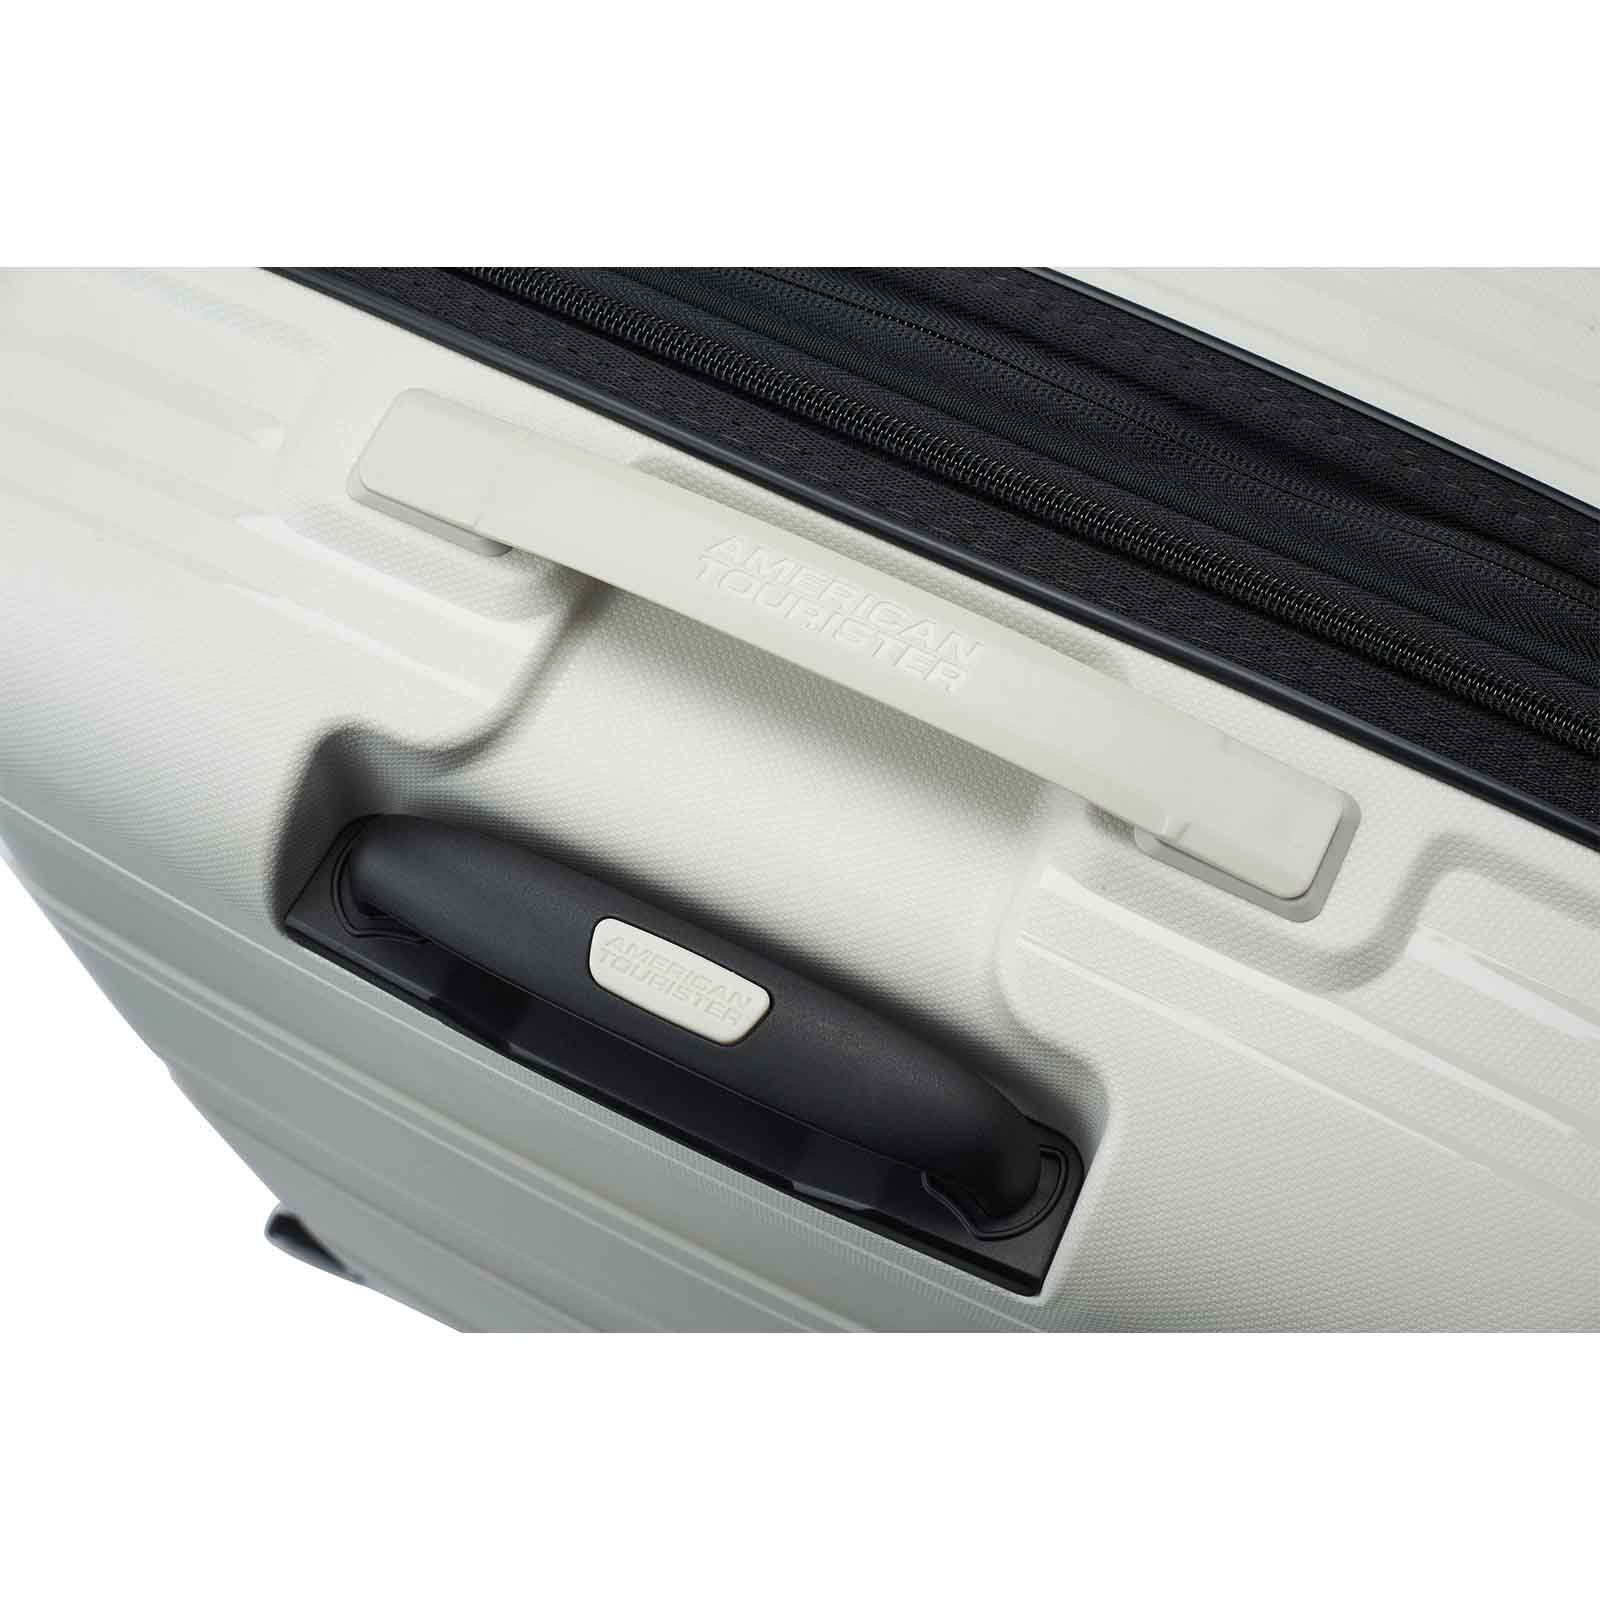 American-Tourister-Light-Max-82cm-Suitcase-Off-White-Trolley